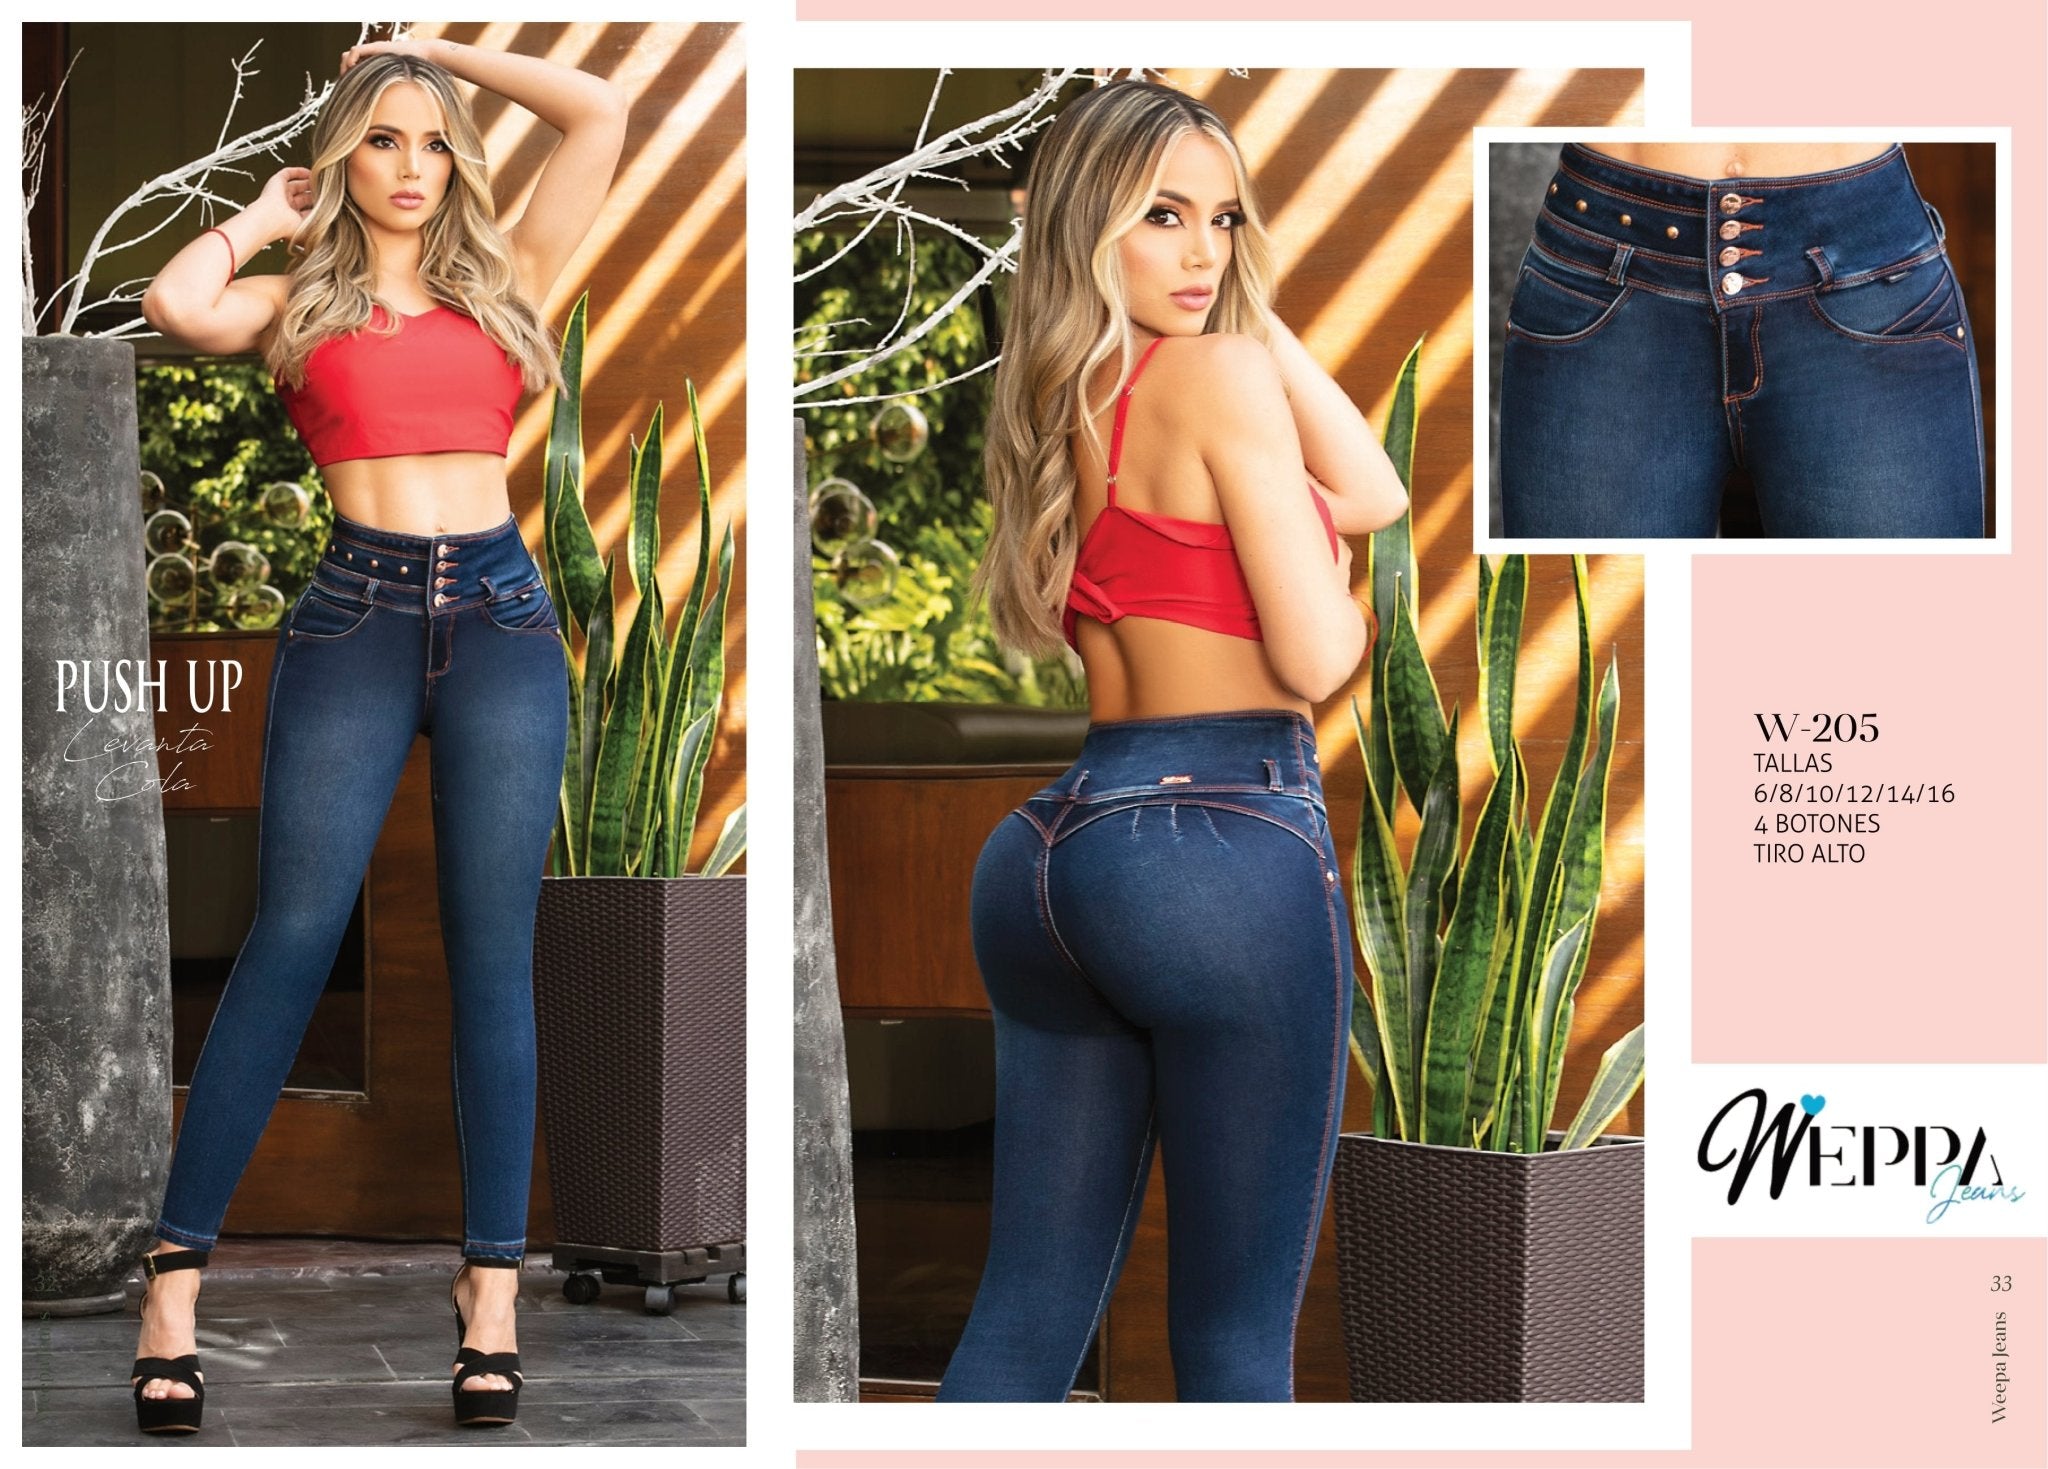 W-205 100% Authentic Colombian Push Up Jeans – JDColFashion